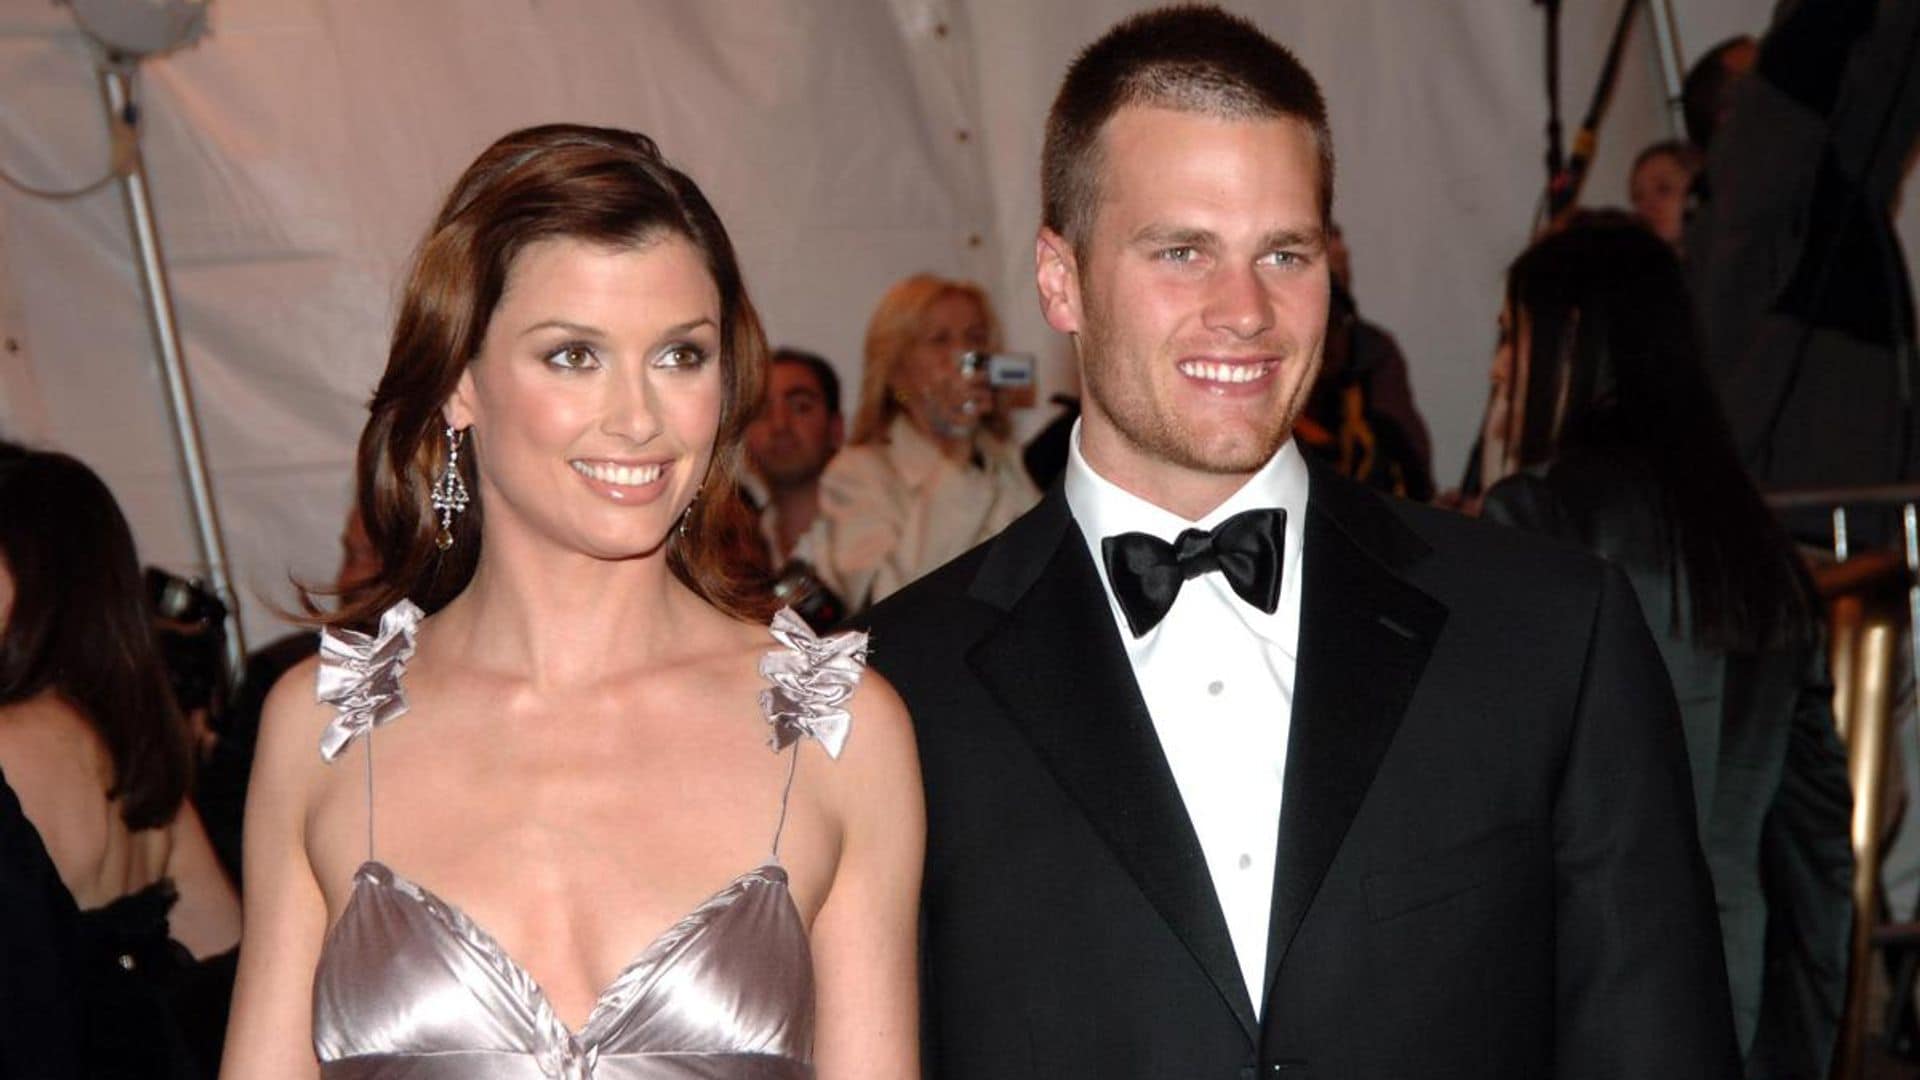 Tom Brady’s ex, Bridget Moynahan, shares a quote about relationships amid the athlete’s divorce